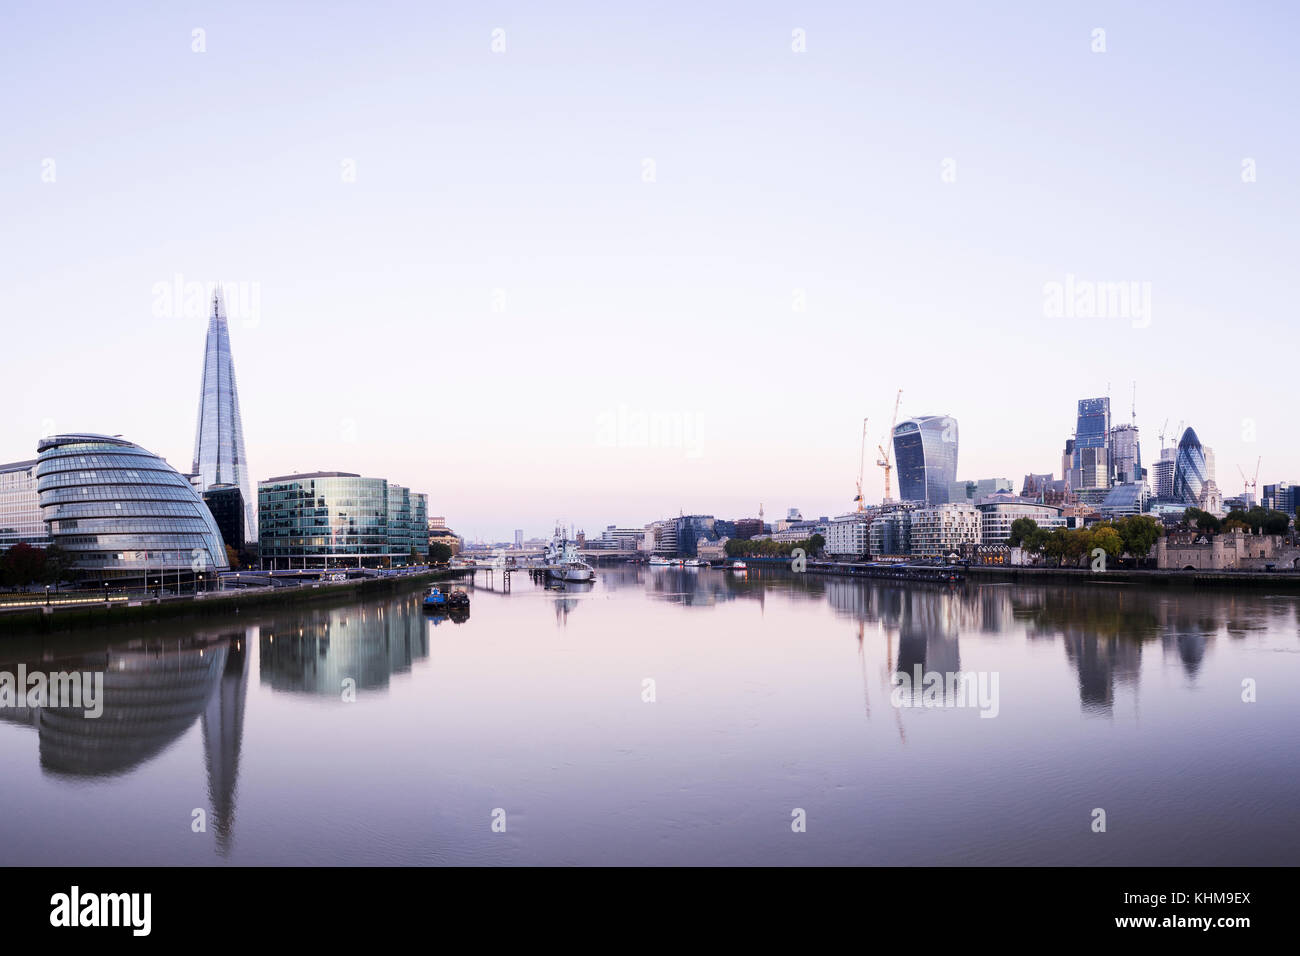 UK, London, City skyline across Thames River with view of the Shard and the financial district at dawn Stock Photo